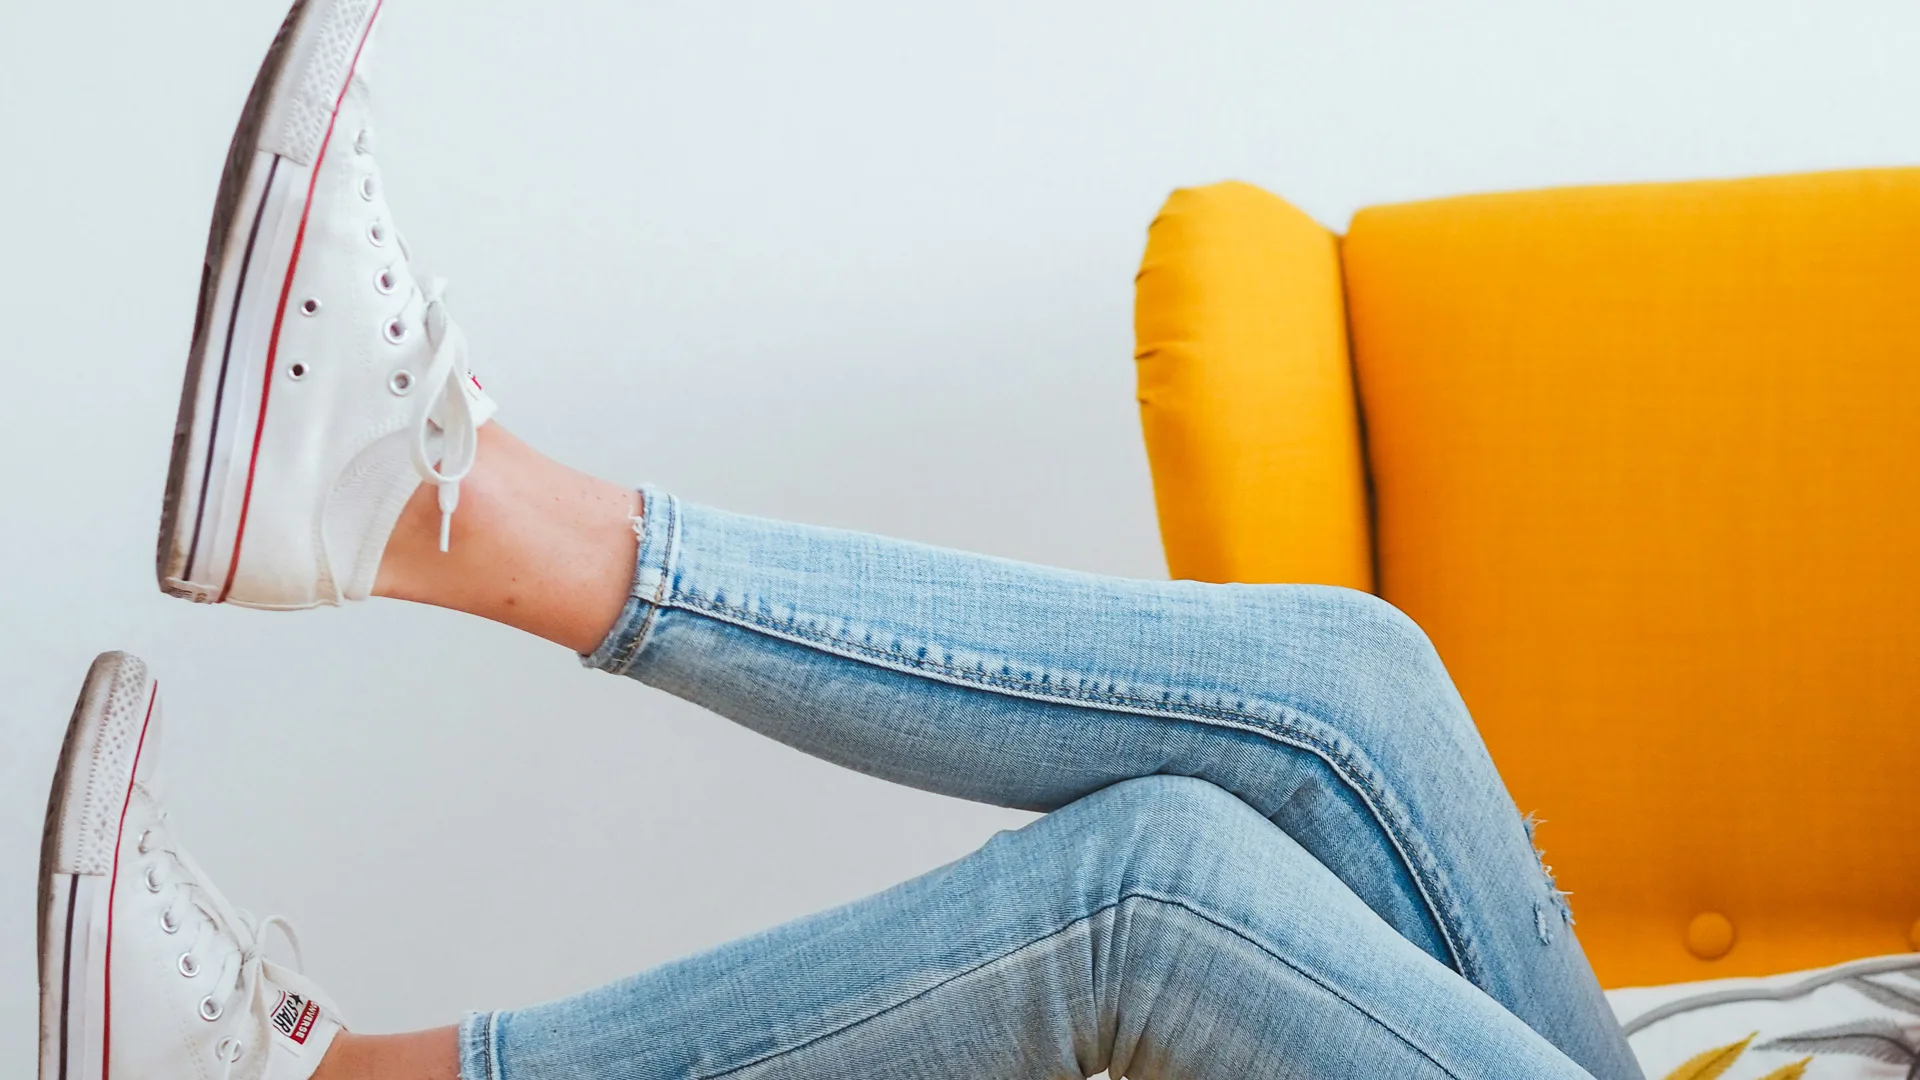 Photo of two legs over a yellow sofa arm wearing blue jeans and converse